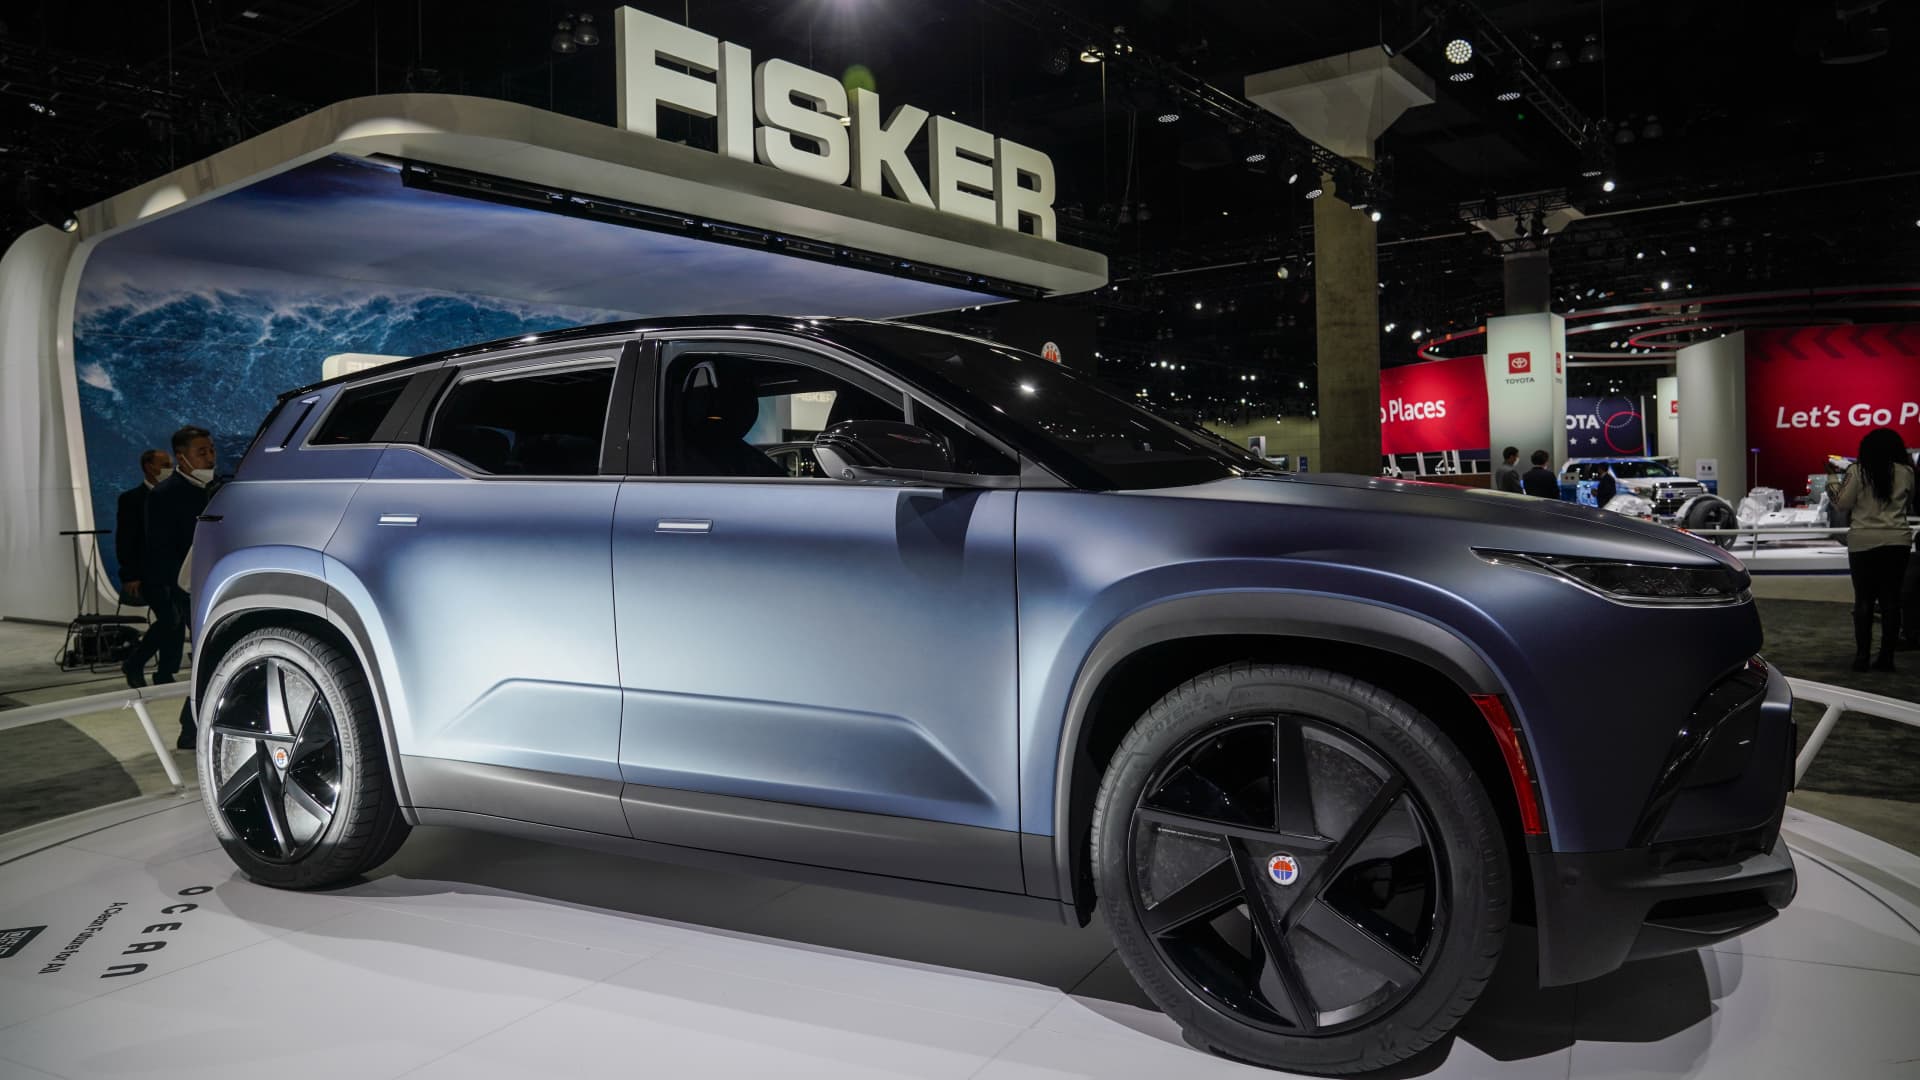 Fisker recalls thousands of Ocean EVs for safety and compliance issues